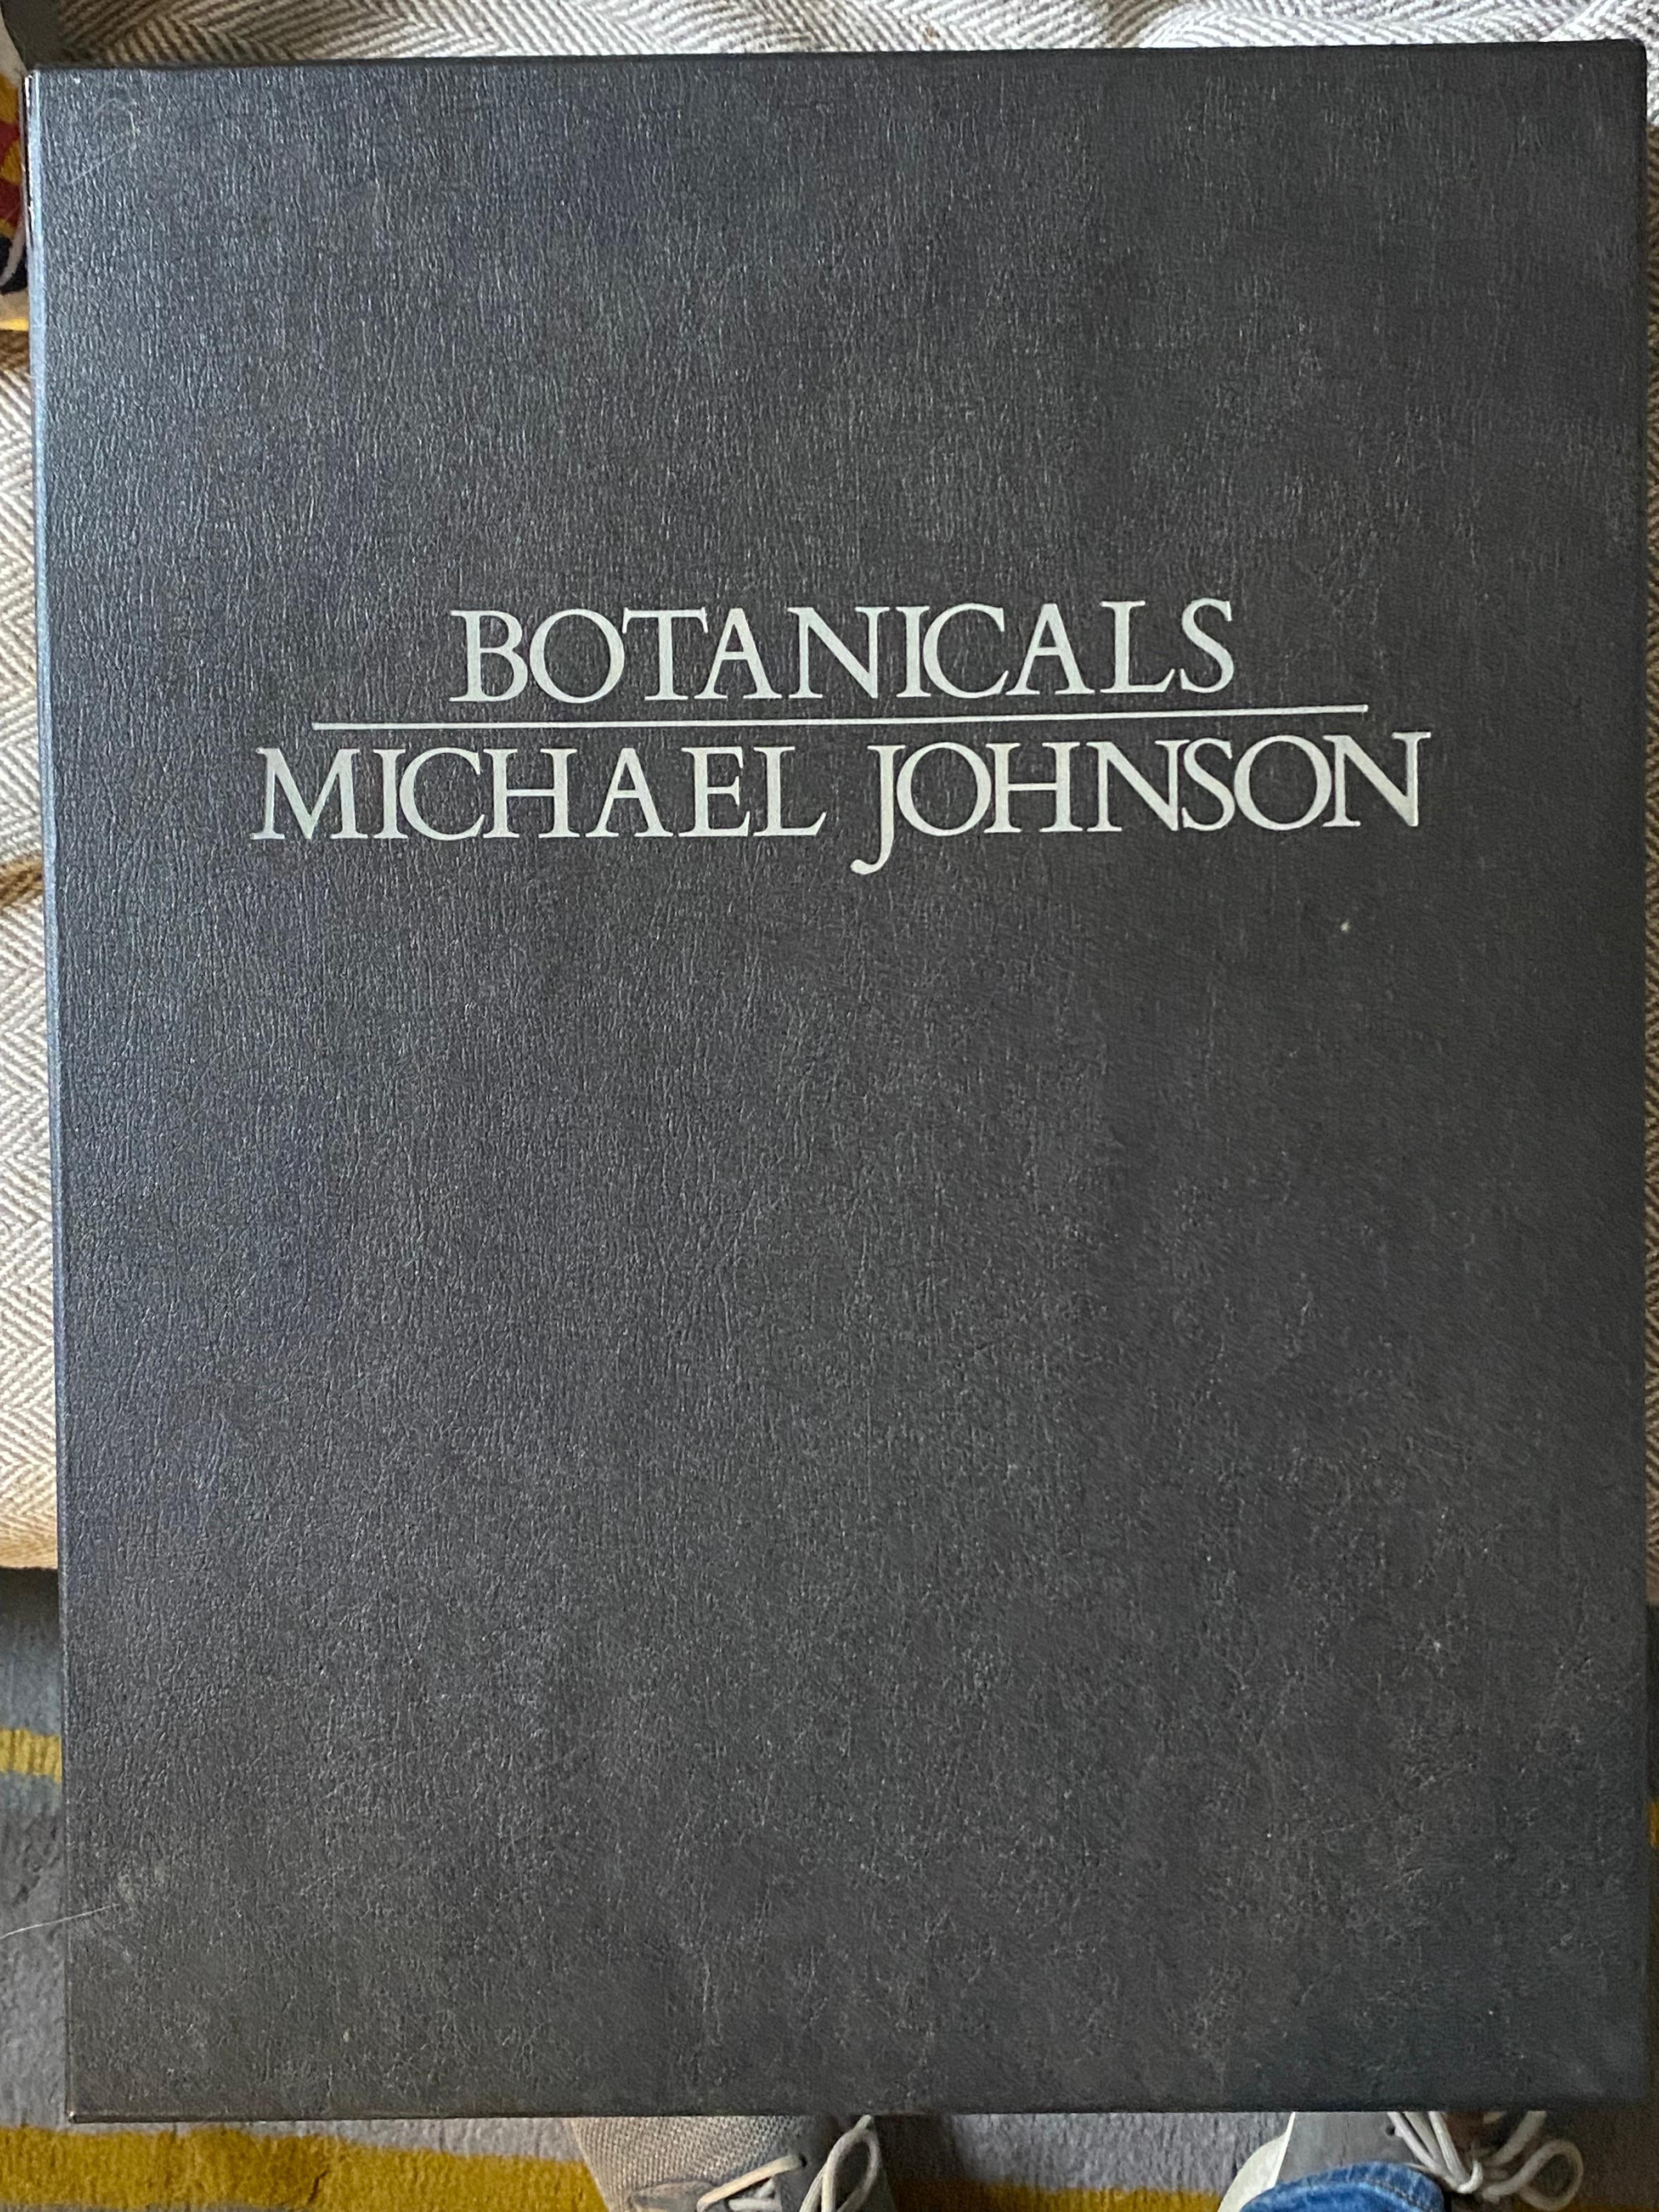 Michael Johnson Botanicals Partial Portfolio.  Set includes 8 prints all with their signed information on back.  Images measure rougly 5 x 7